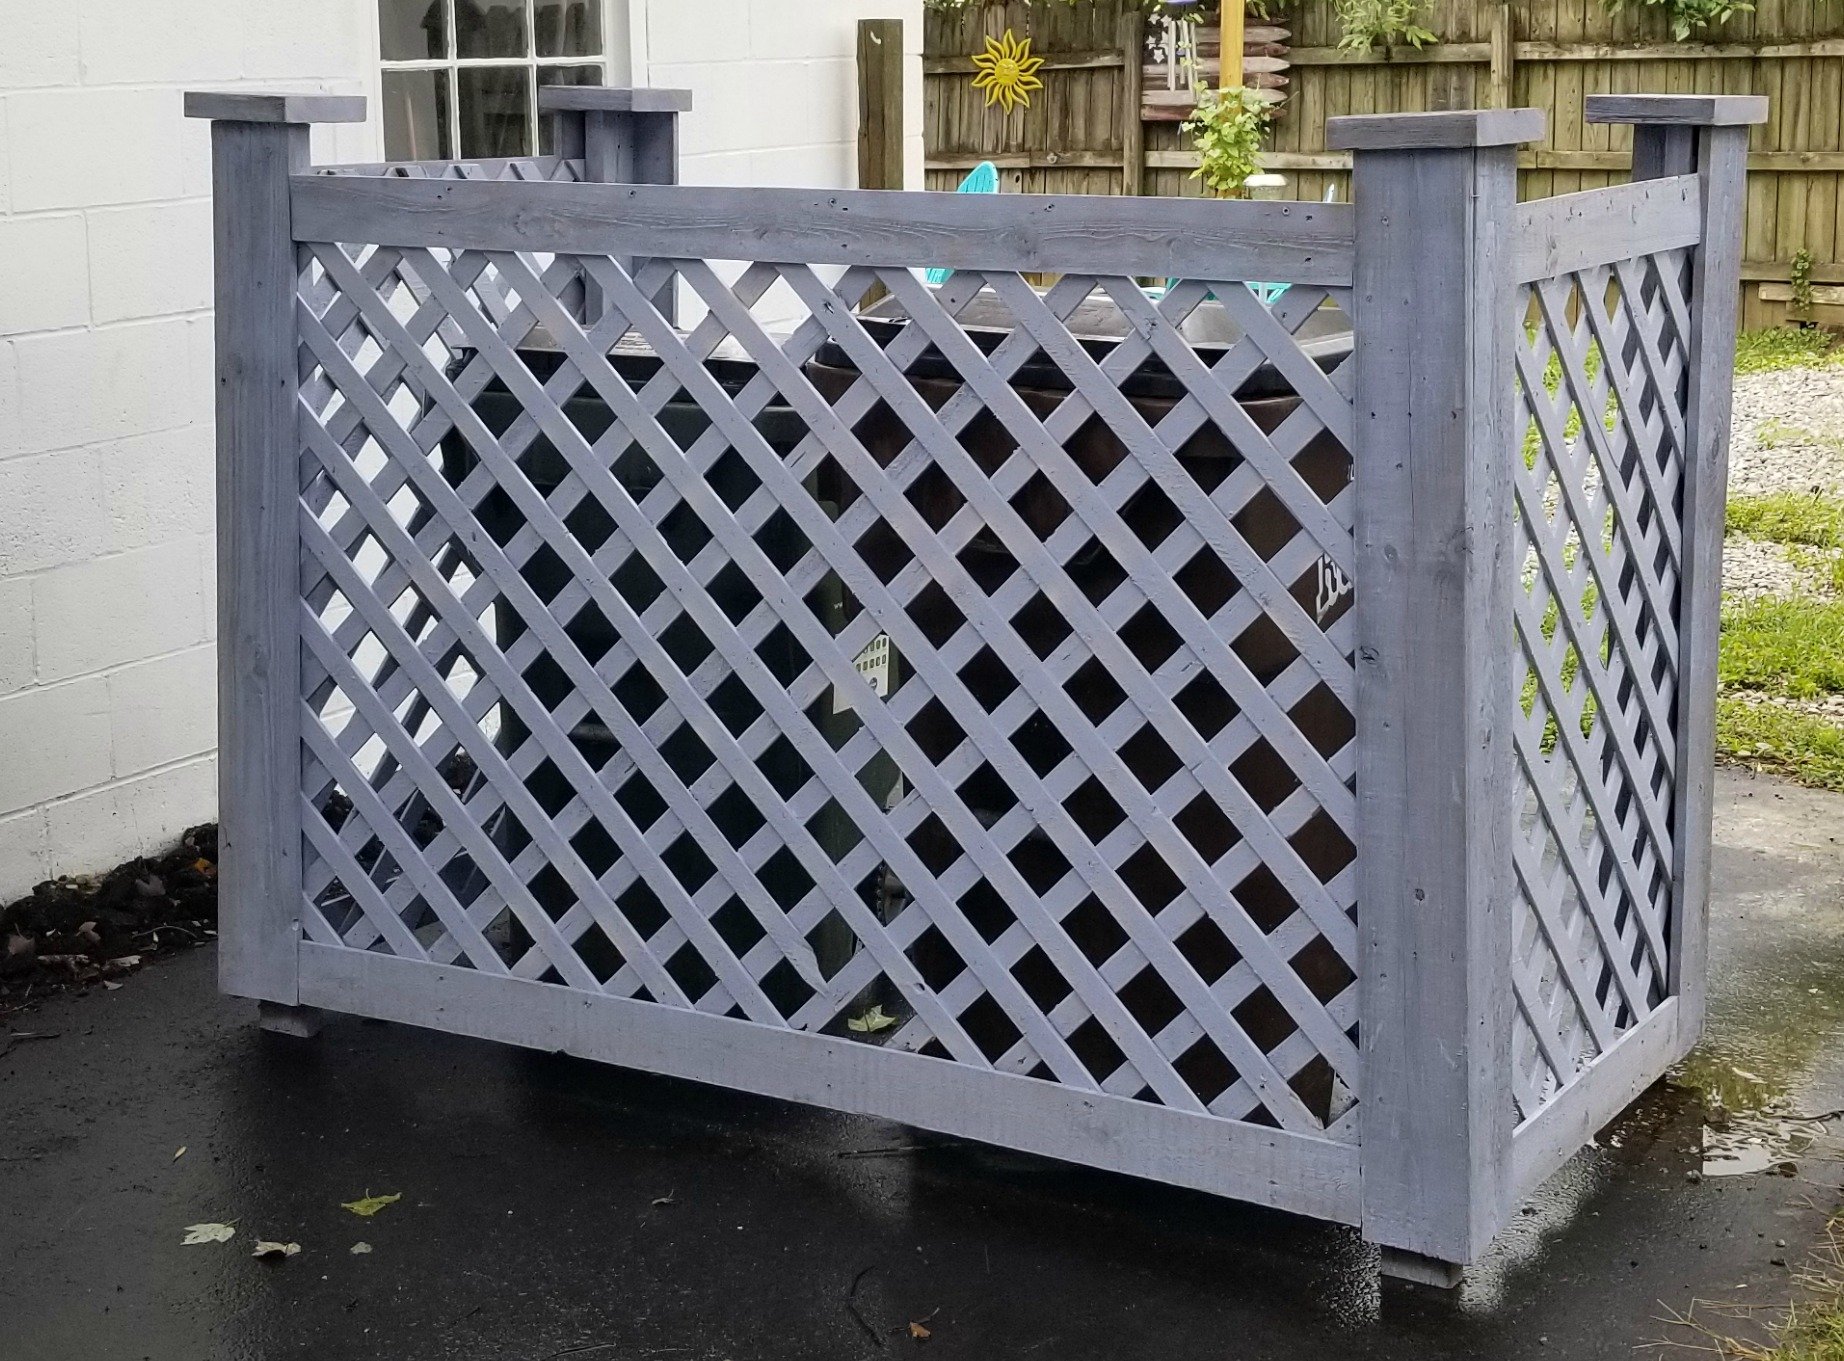 How to Build a Trash Can Enclosure 